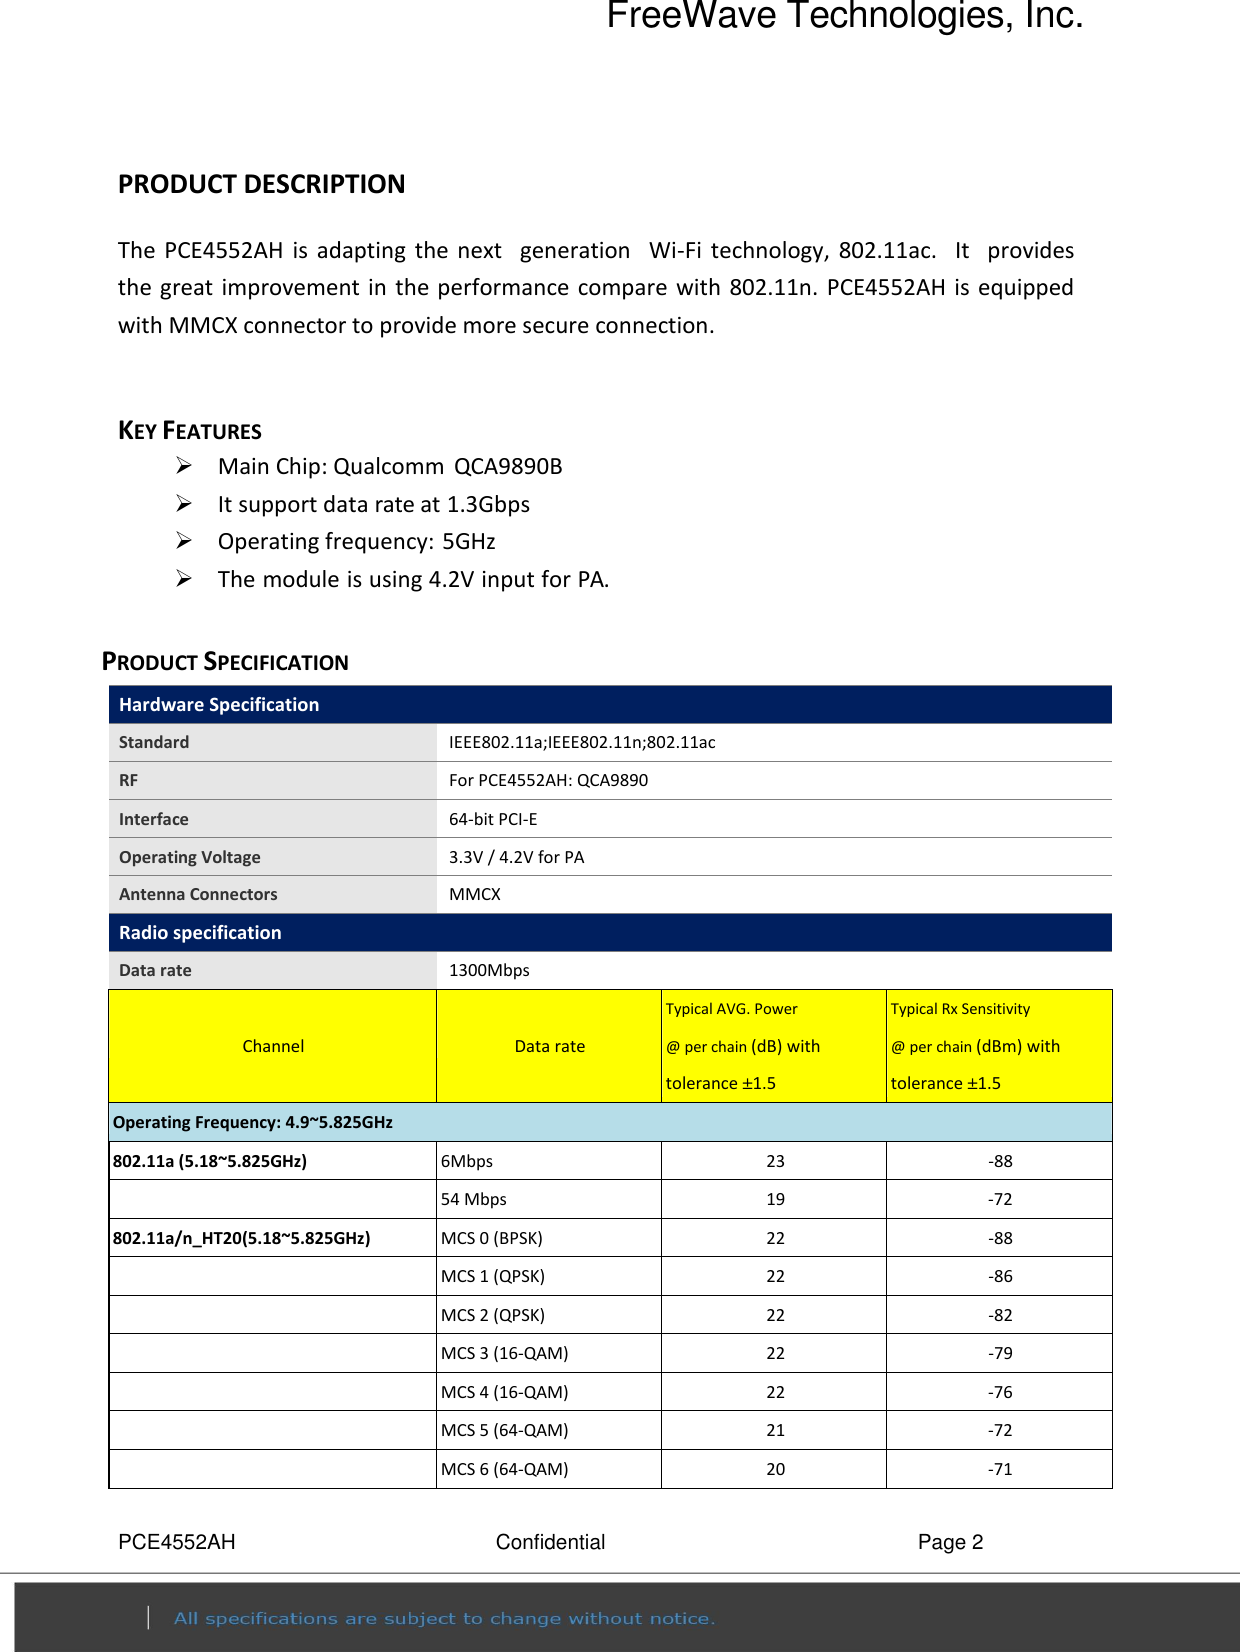 Page 2 of FreeWave Technologies PRW5000AC Wireless 802.11ac/b/g/n access point User Manual PCE4552AH specification v0 2